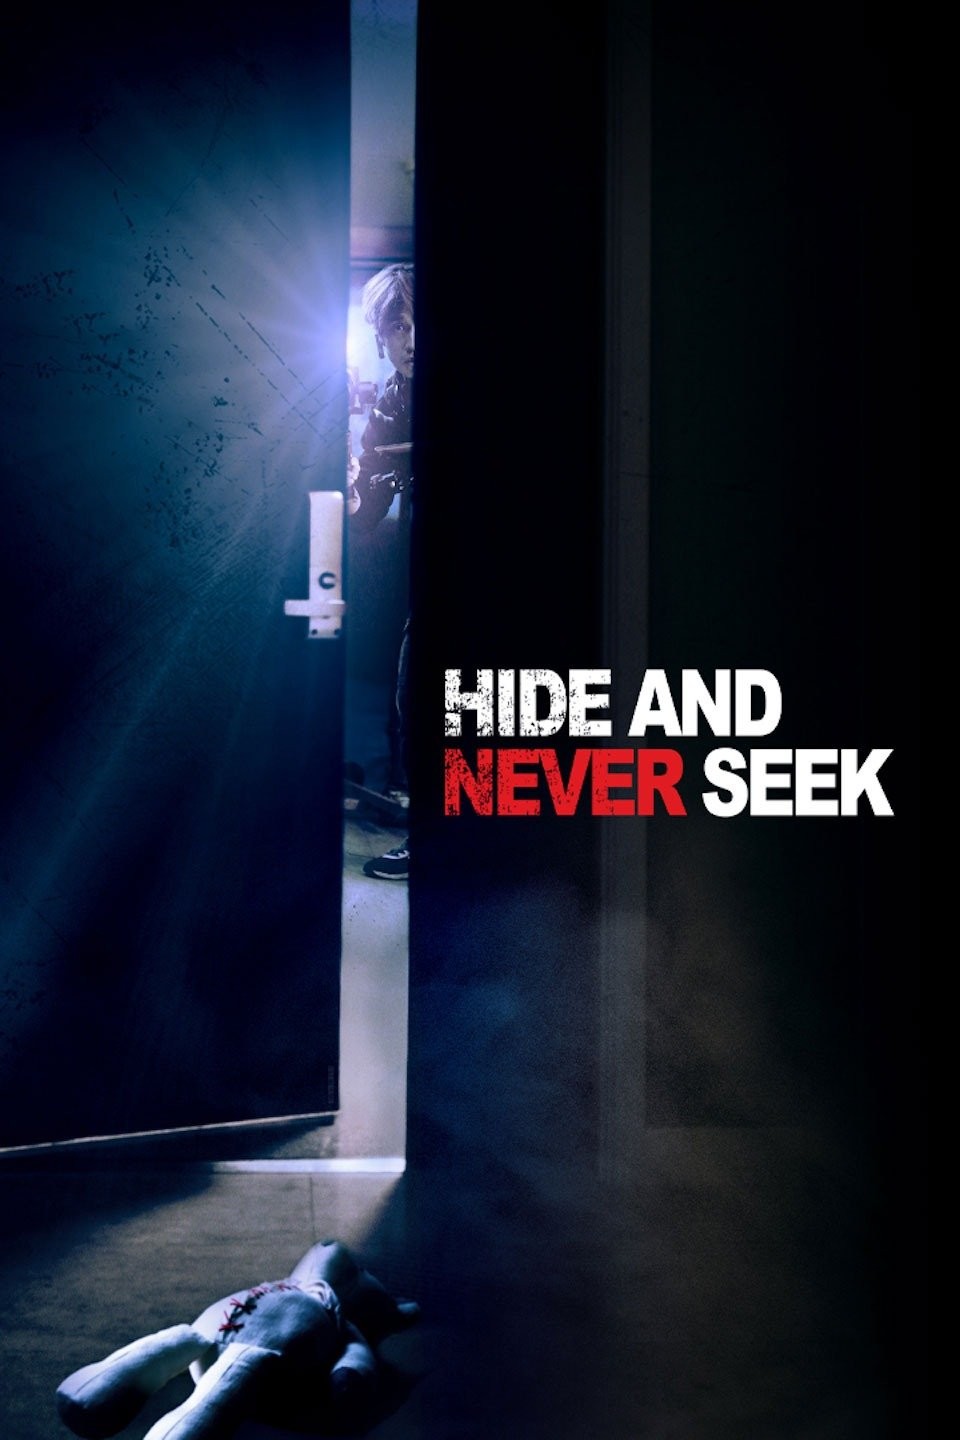 When Hide-And-Seek Turns Potentially Dangerous